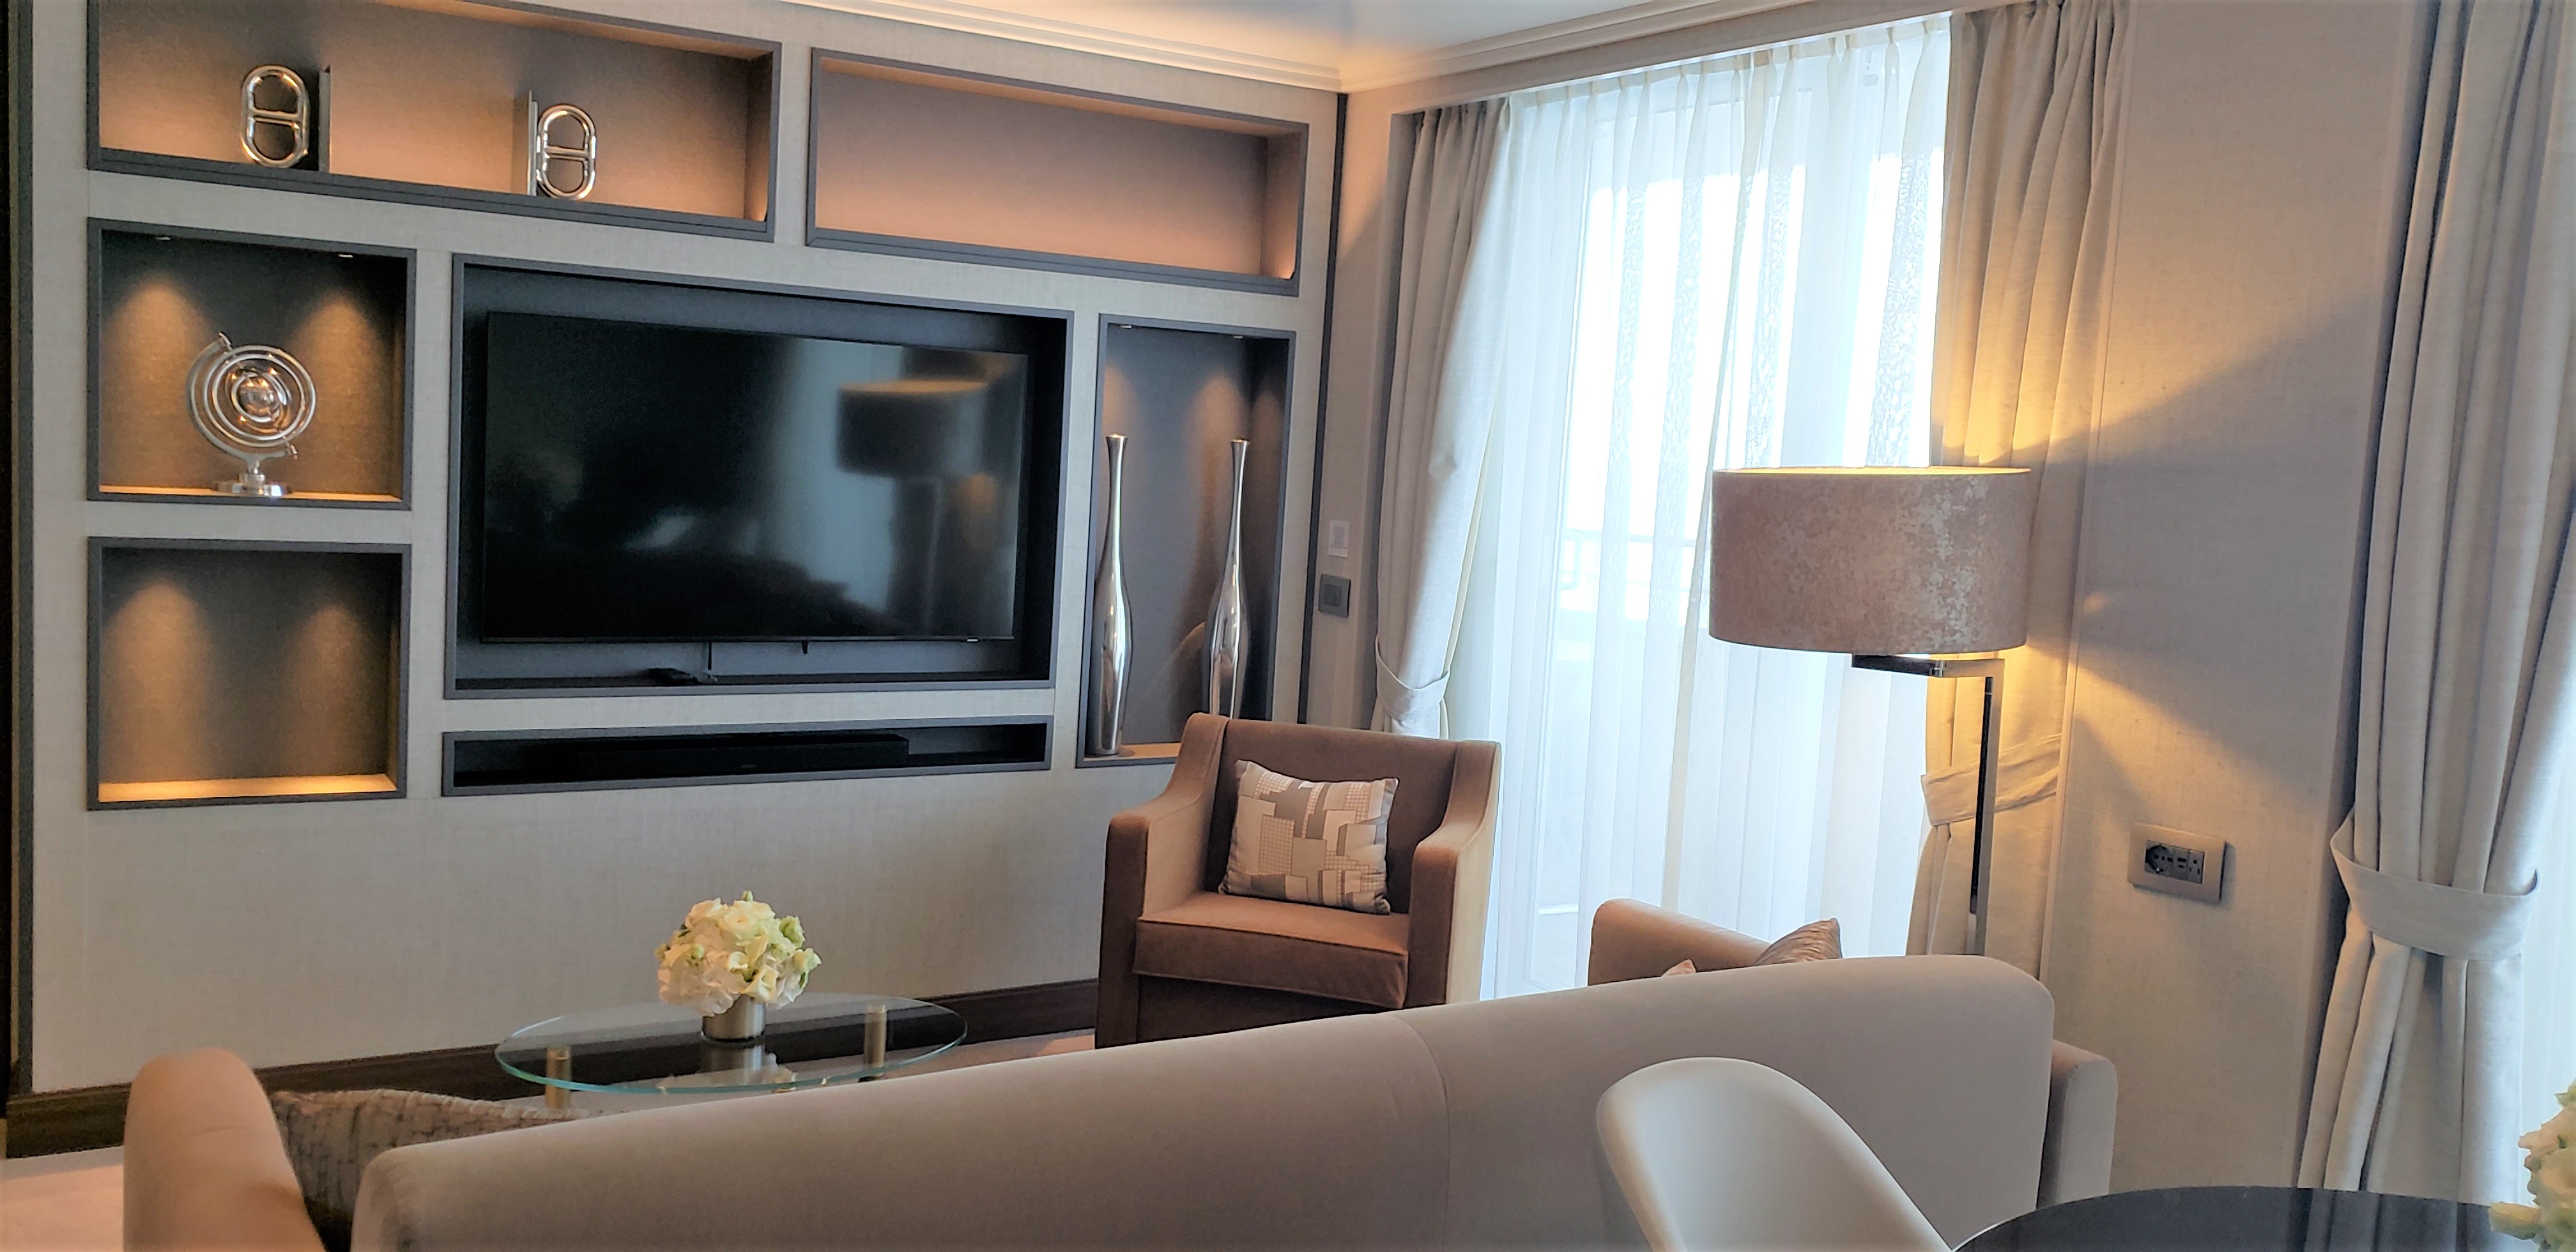 Living area of the new Junior Crystal Penthouse Suite category on Crystal Serenity